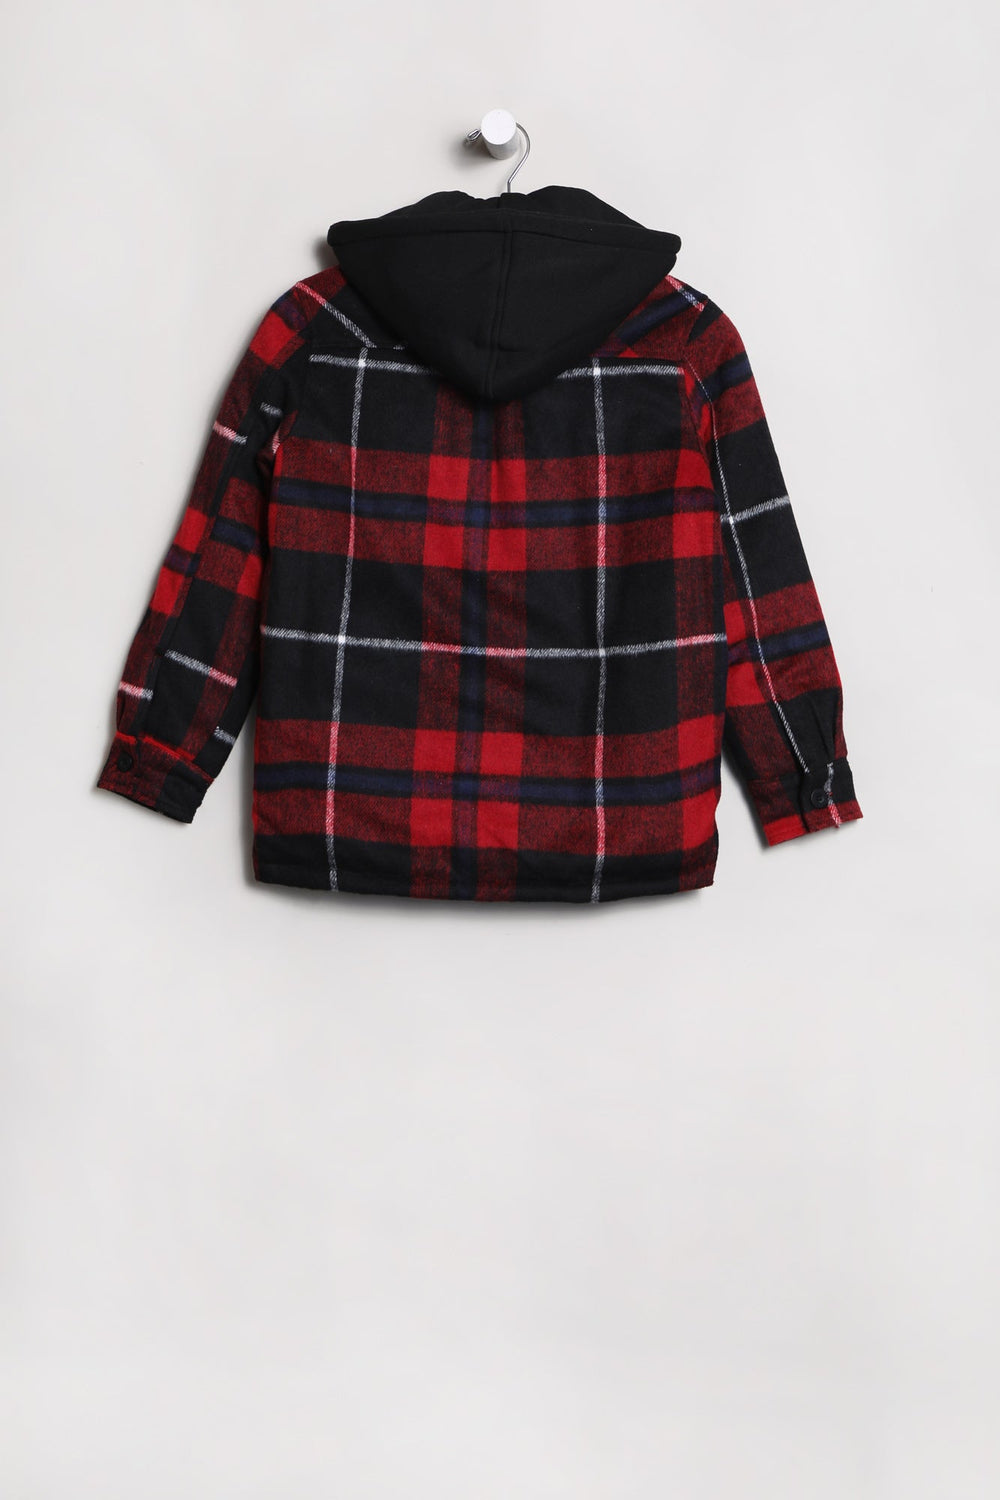 West49 Youth Lined Flannel Shacket Red